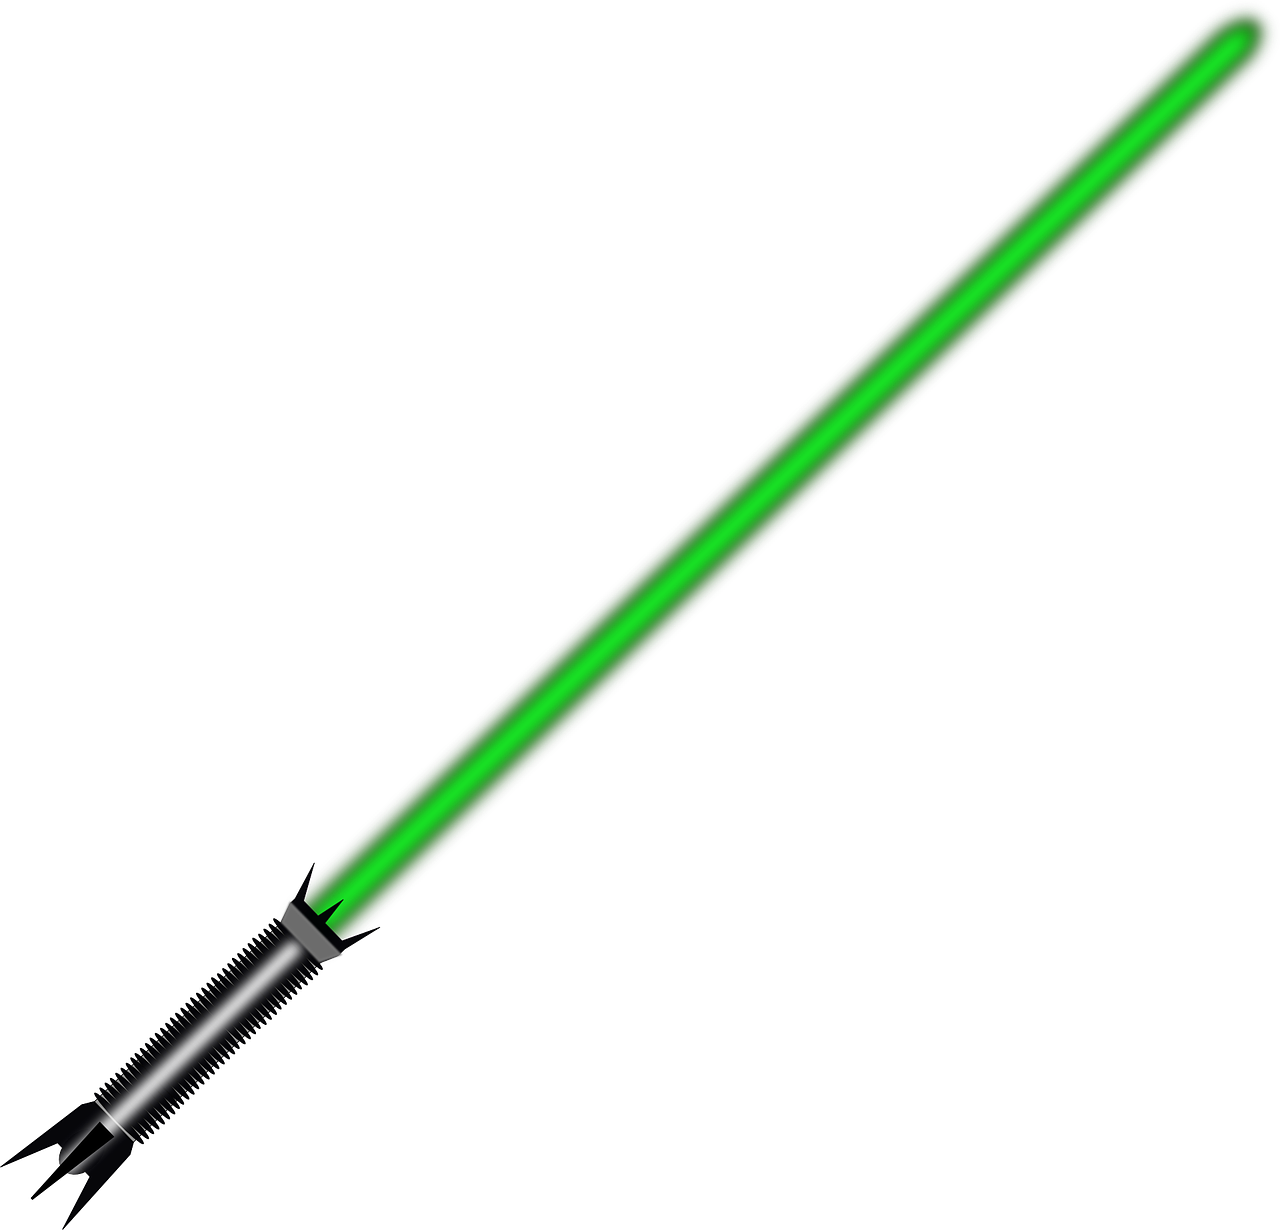 A Green Light Saber With A Black Background